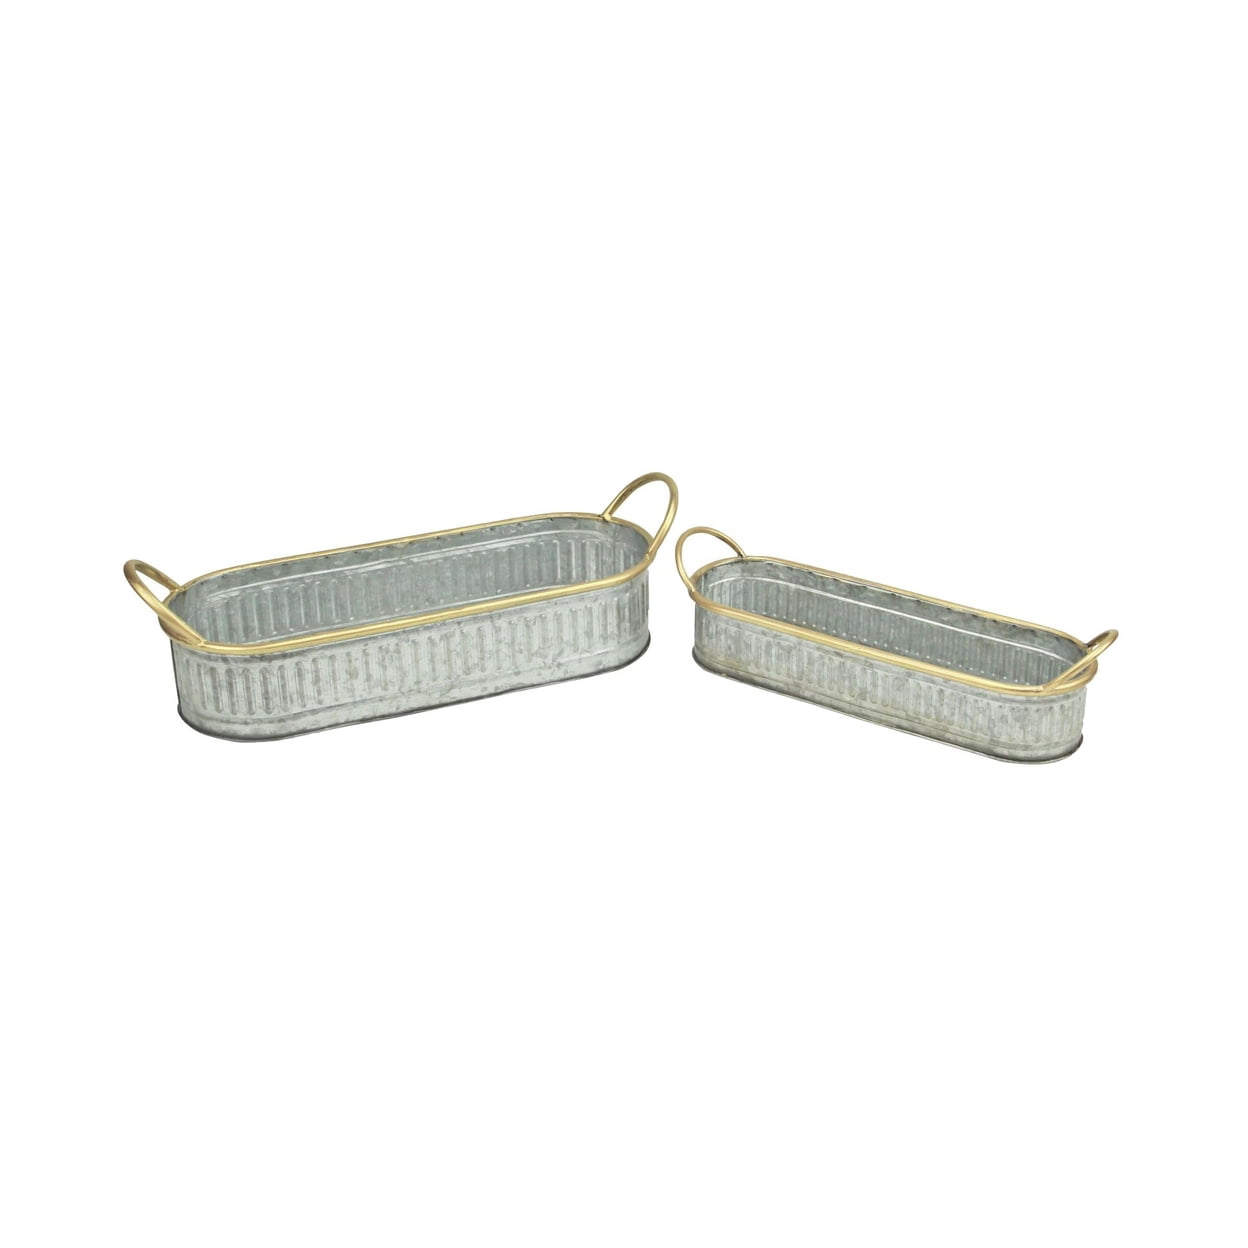 Picture of Cheungs 5443-2 Oval Container with Gold Rim & Handles - Set of 2